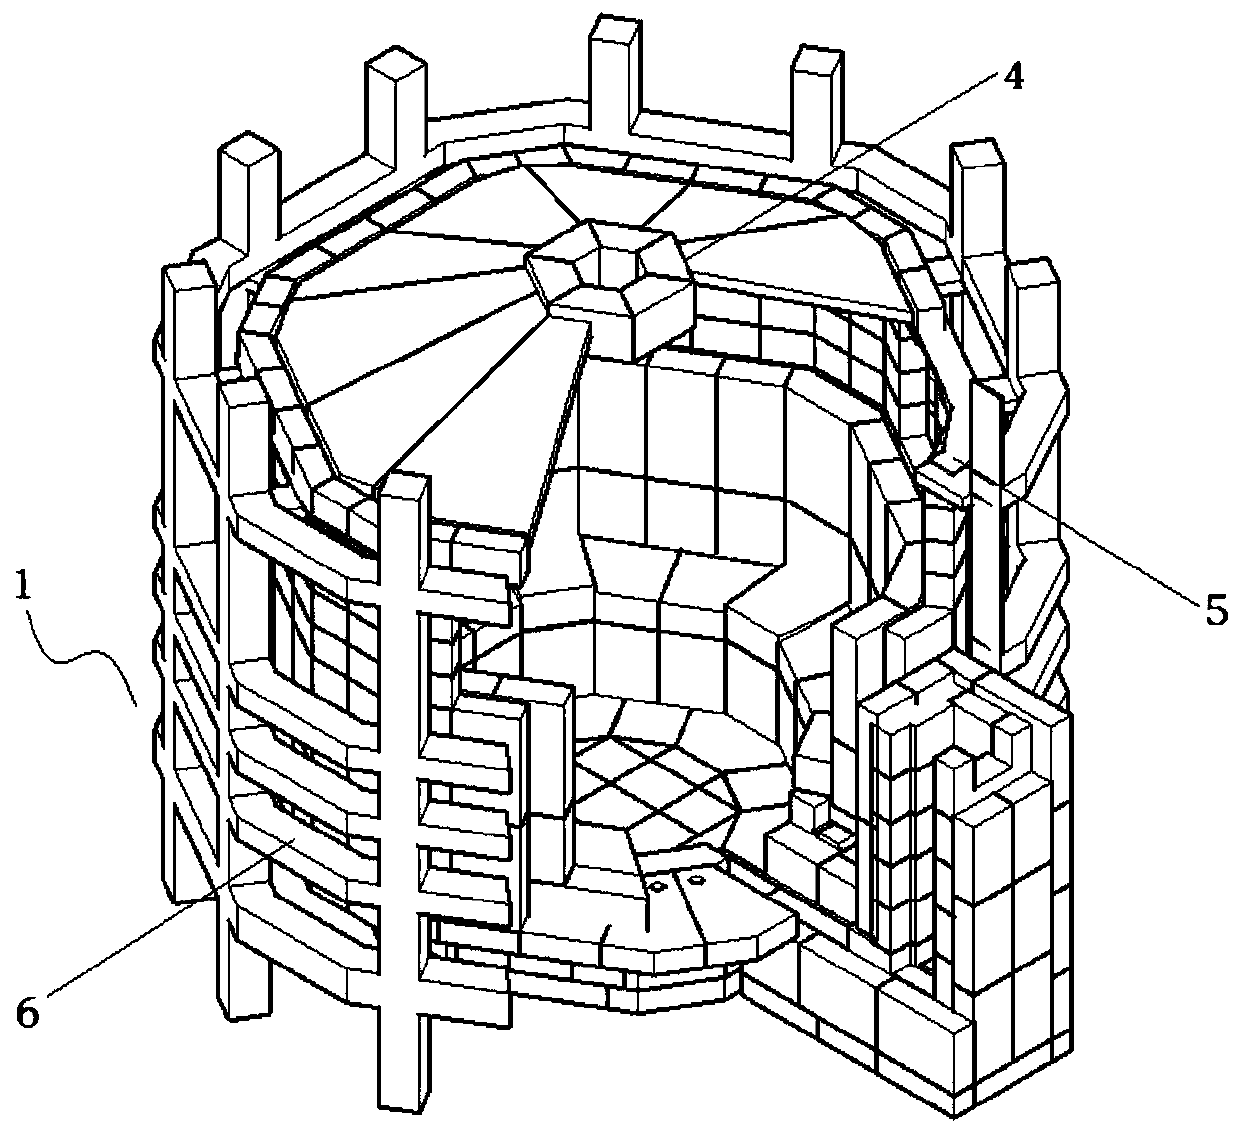 A maintenance method for an all-electric melting furnace